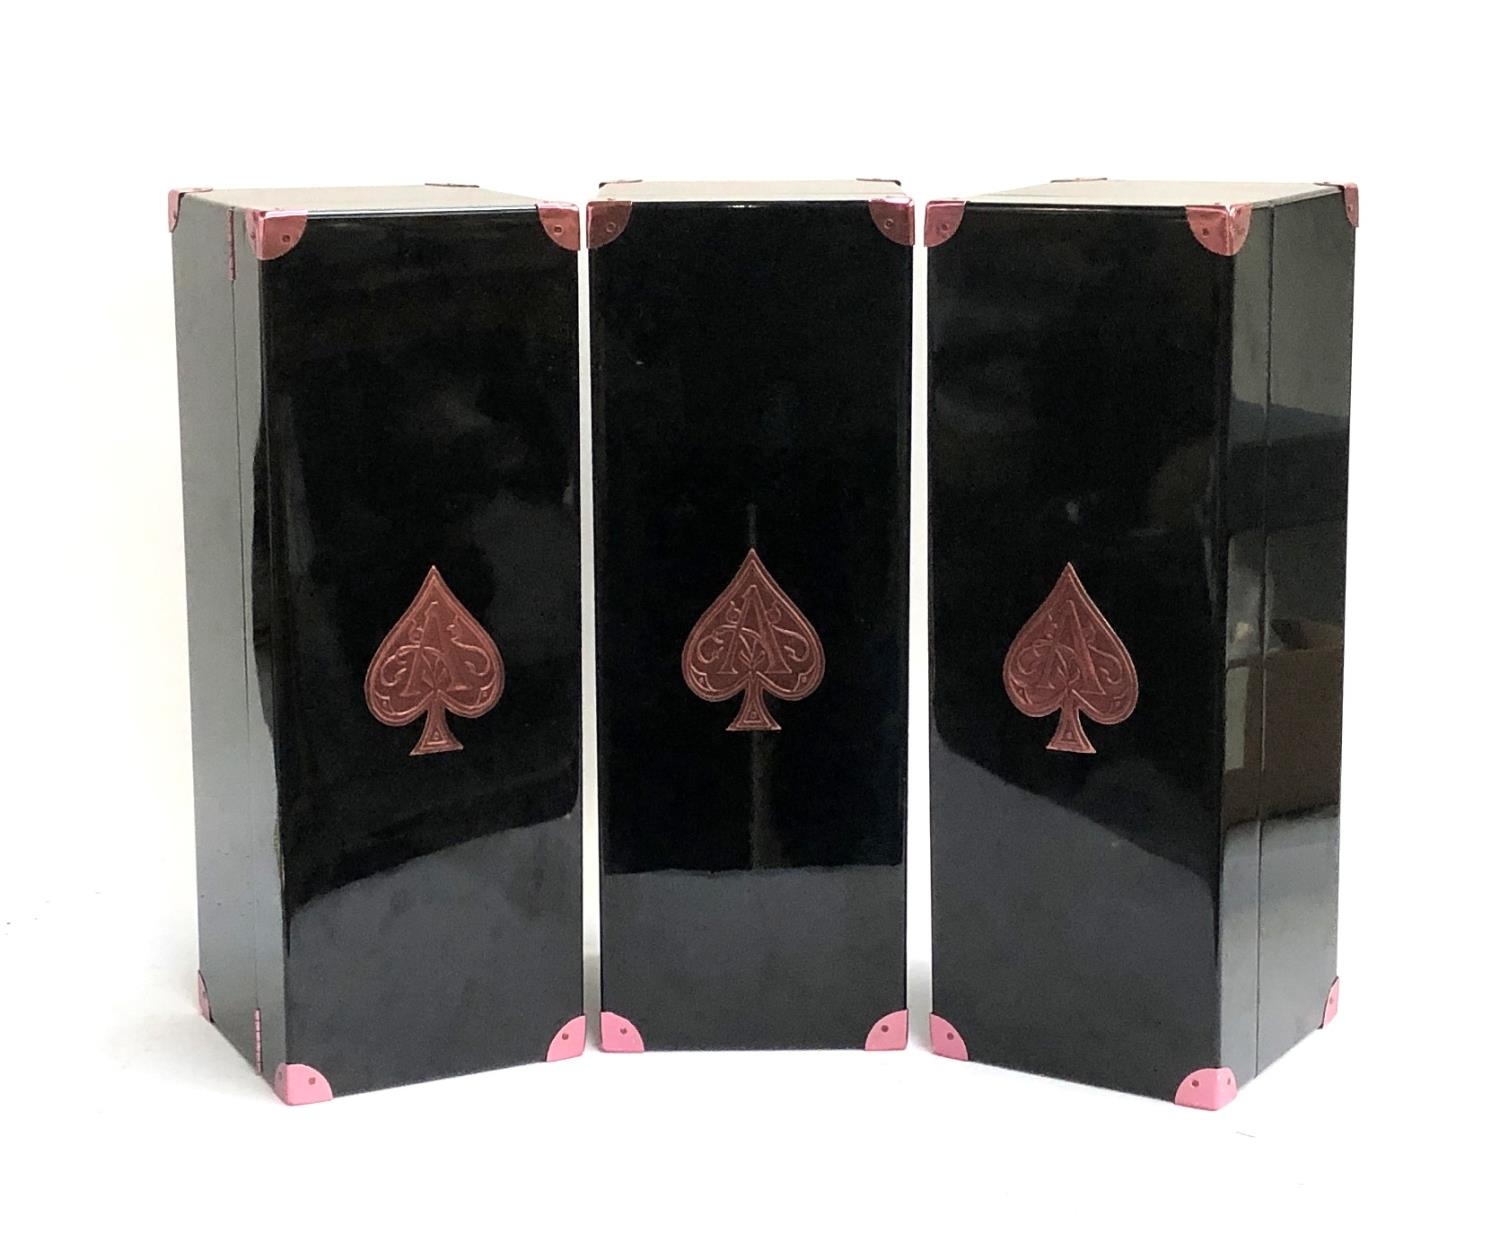 Three Armand de Brignac Ace of Spades limited edition magnum champagne cases, black lacquered,